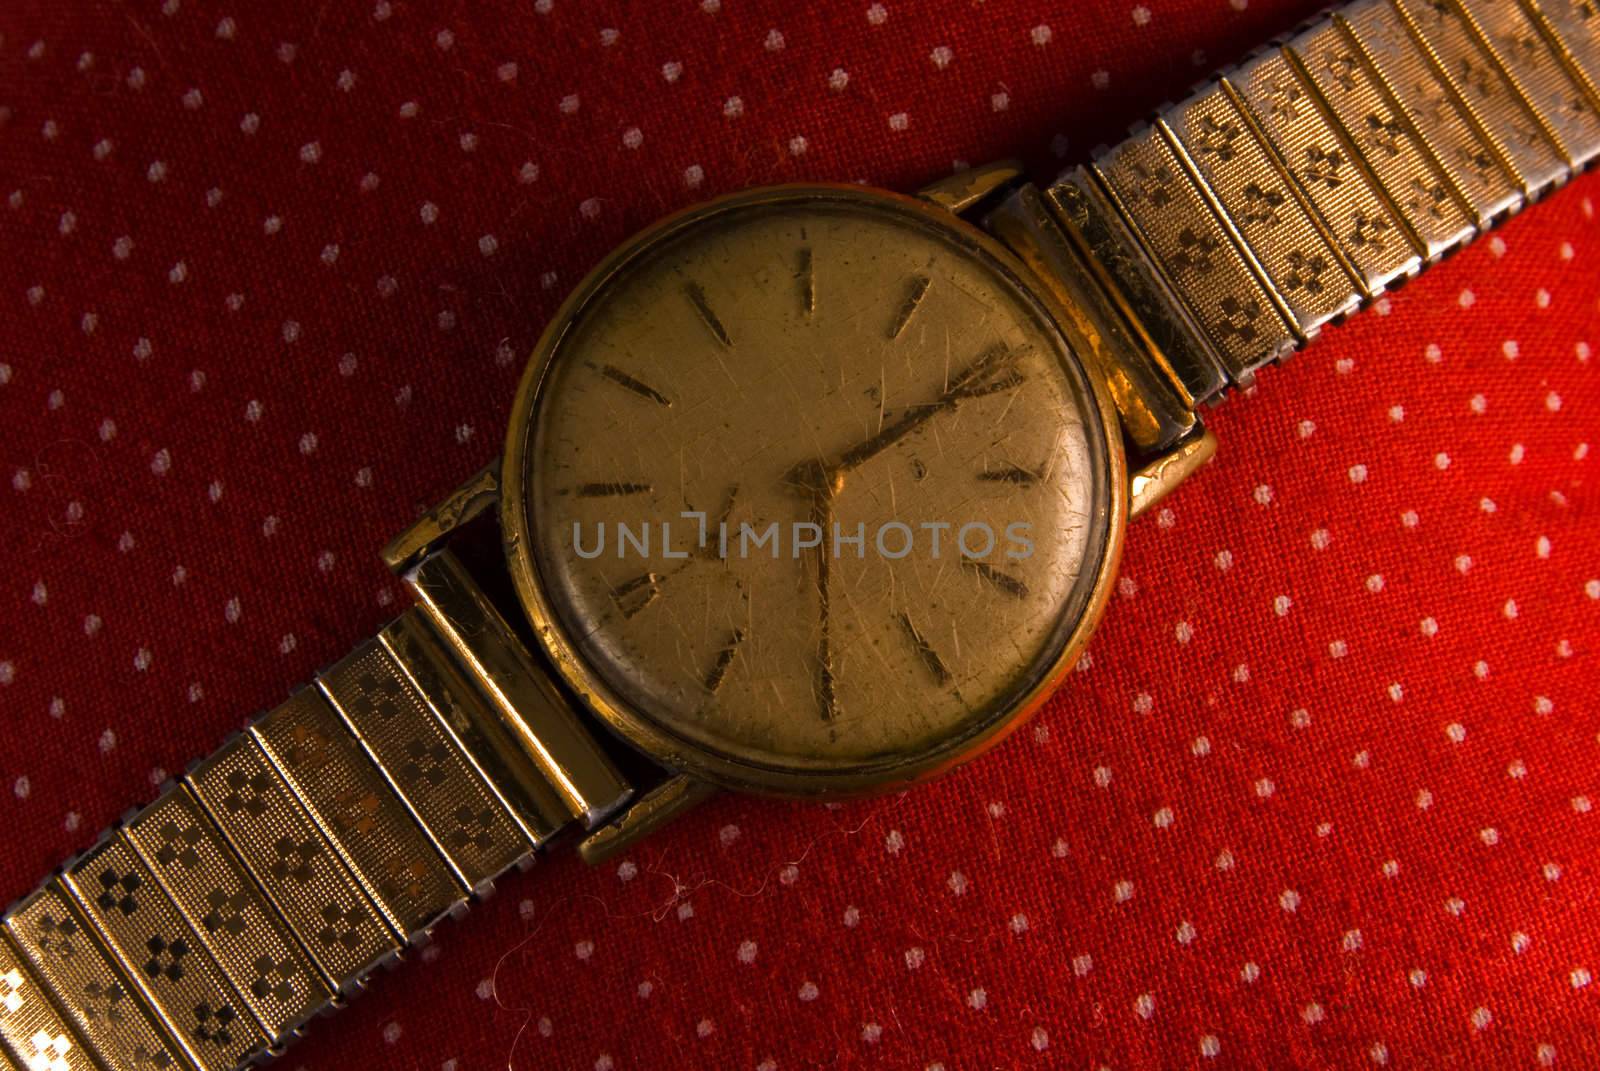 Retro golden wristwatch close up on red vintage cloth background.